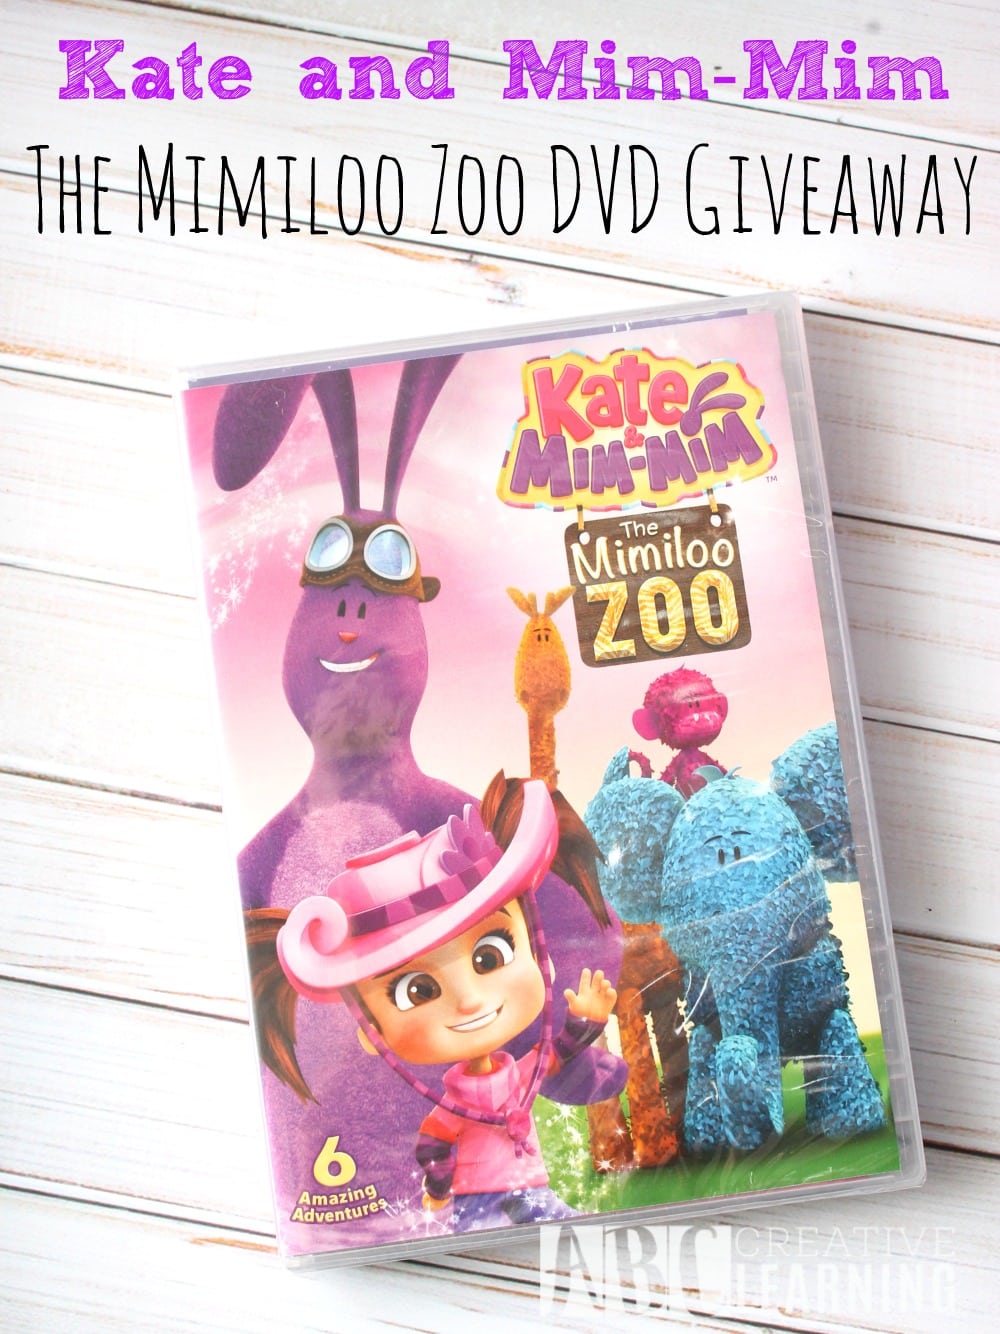 twirl-away-with-kate-and-mim-mim-new-products-giveaway-dvd-ga